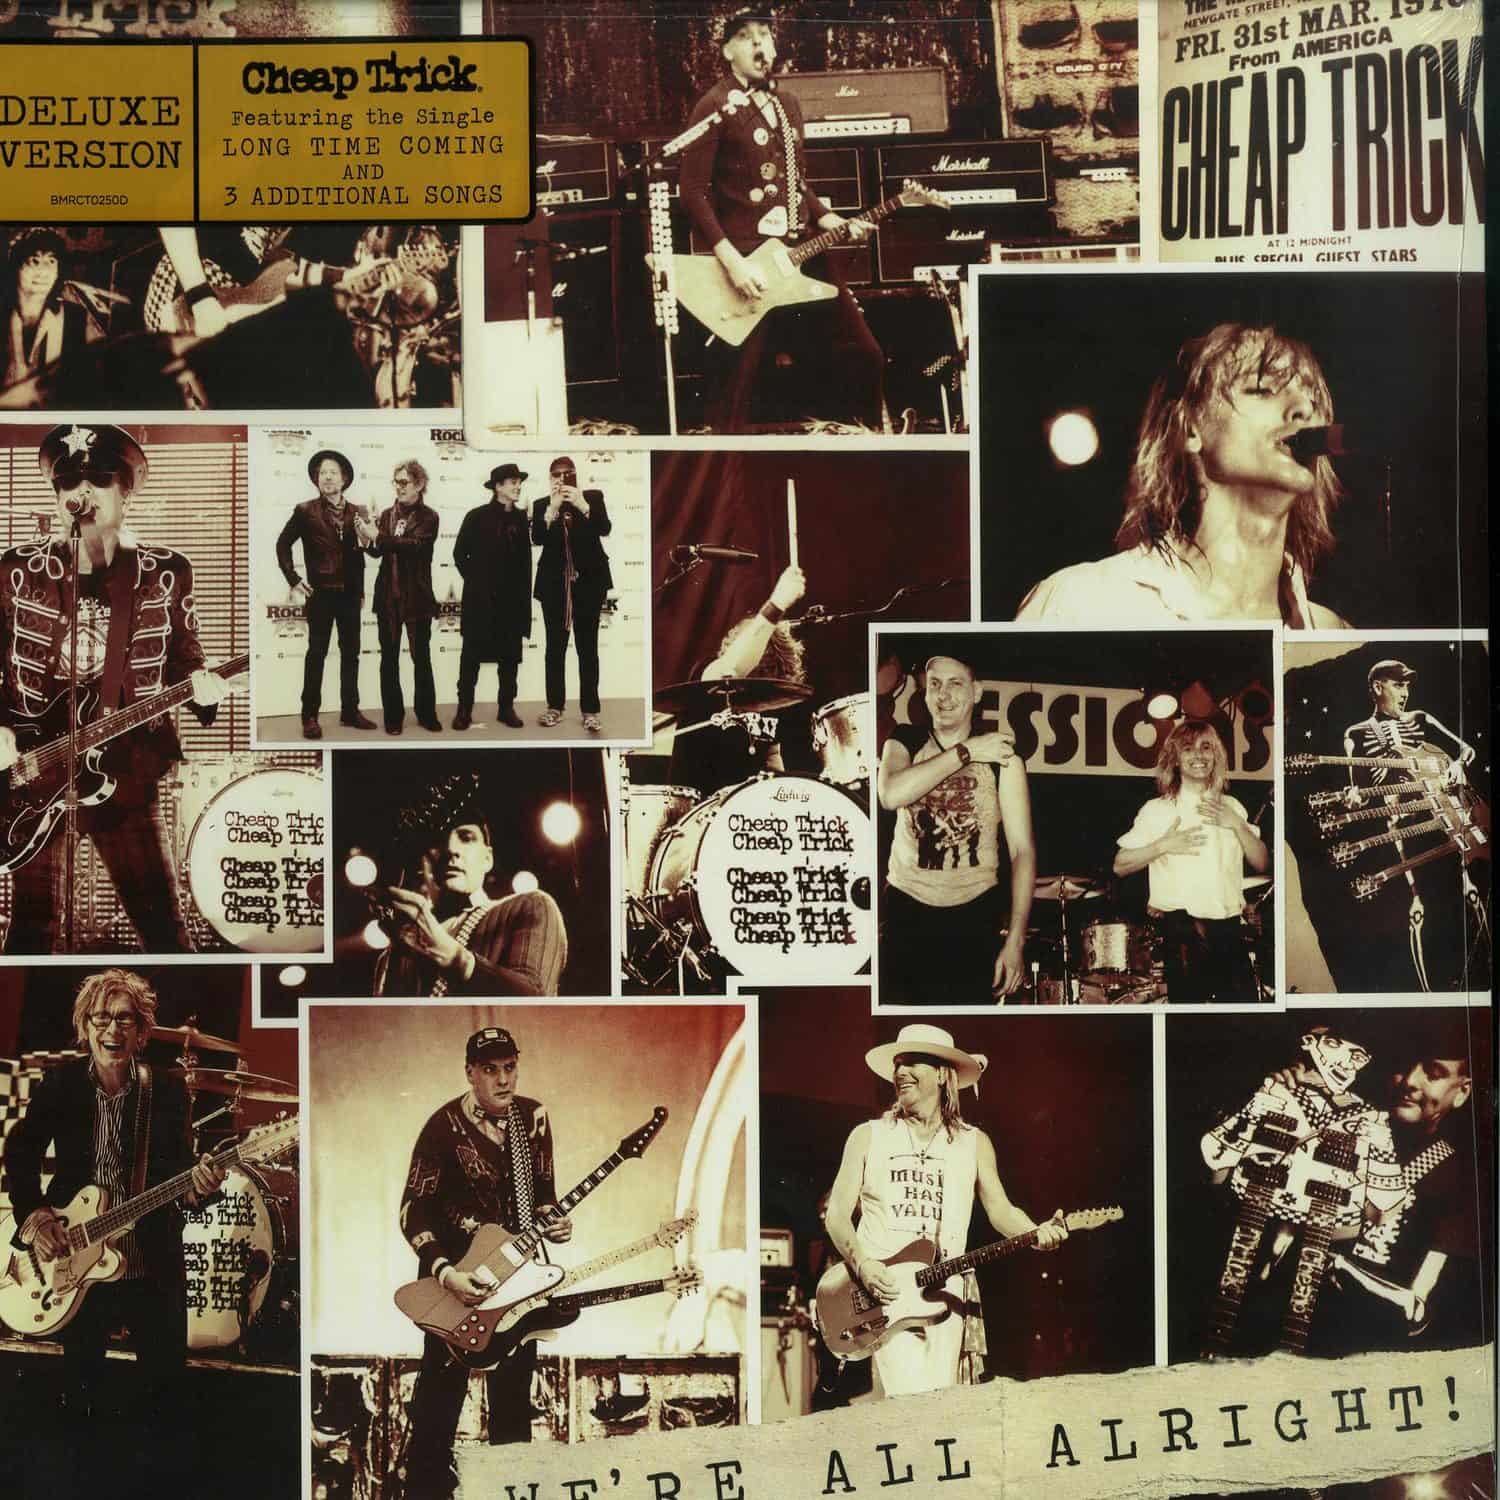 Cheap Trick - WE ARE ALL ALRIGHT! 